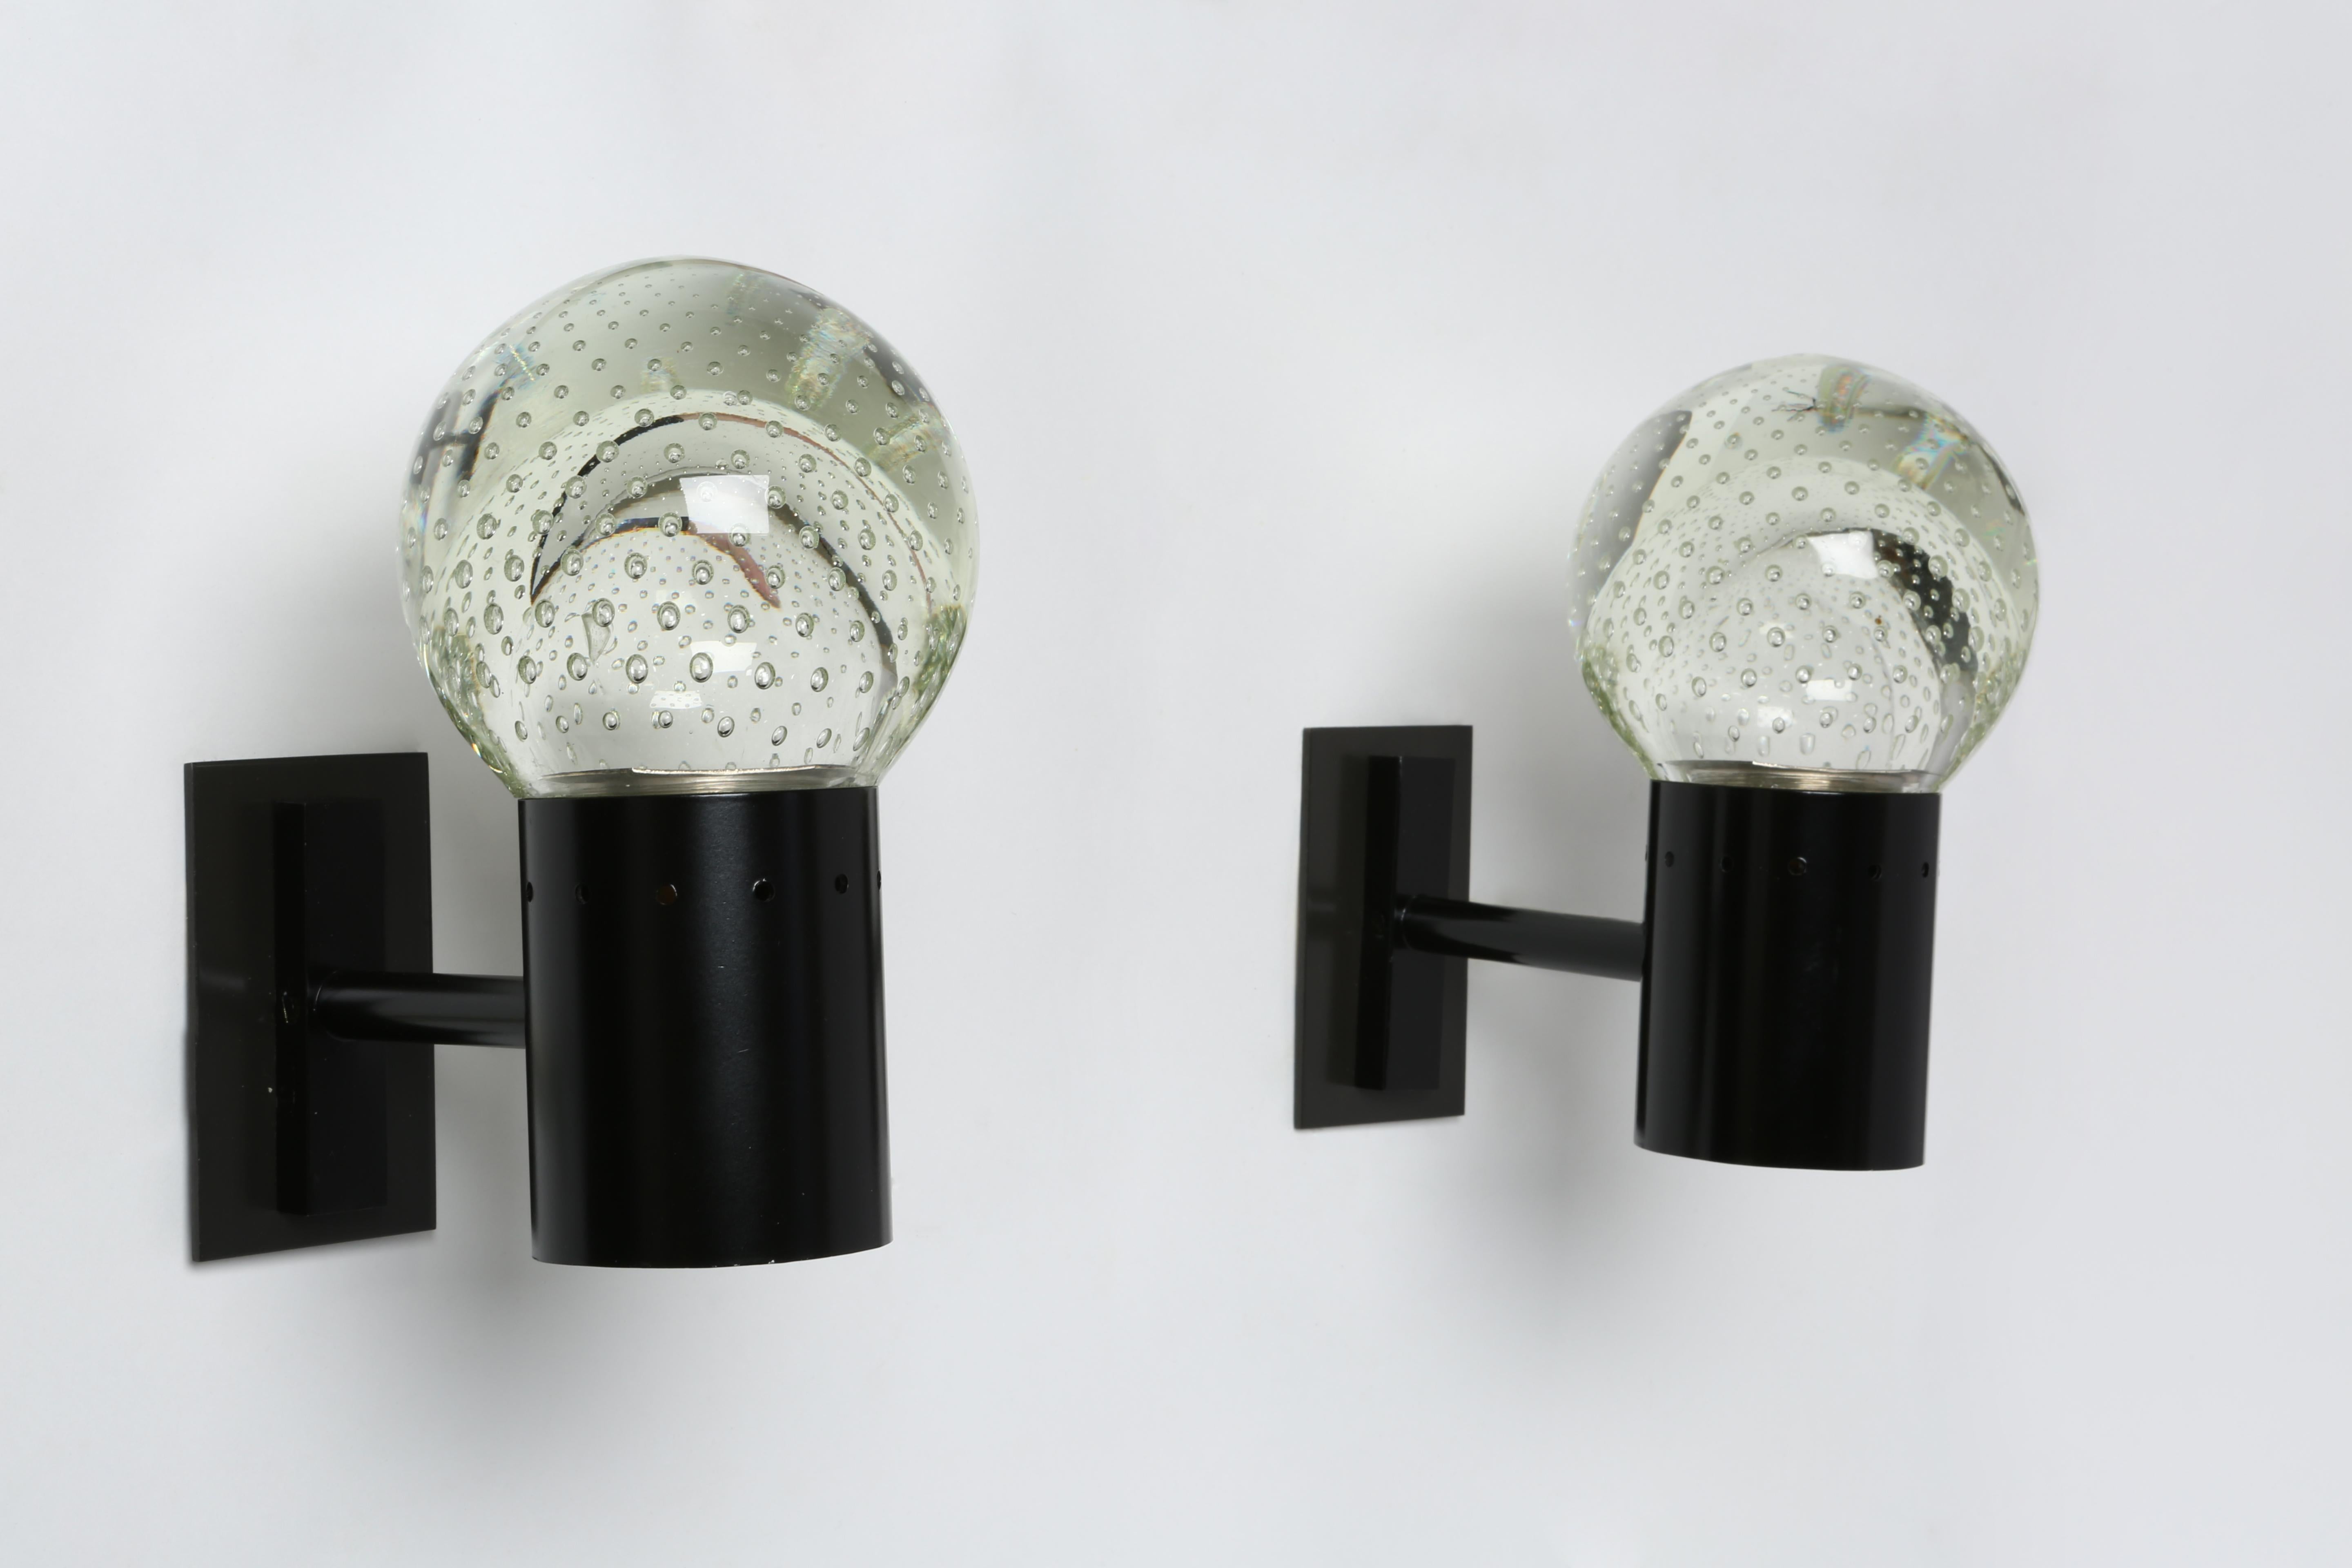 Gino Sarfatti sconces for Archimede Seguso, a pair
Designed and manufactured in Italy in 1950s
Seguso bullicante glass and enameled metal frames.
Rewired for US with custom back plates.
Take 1 candelabra bulb each.
Restored. Metal re-enameled.
Price